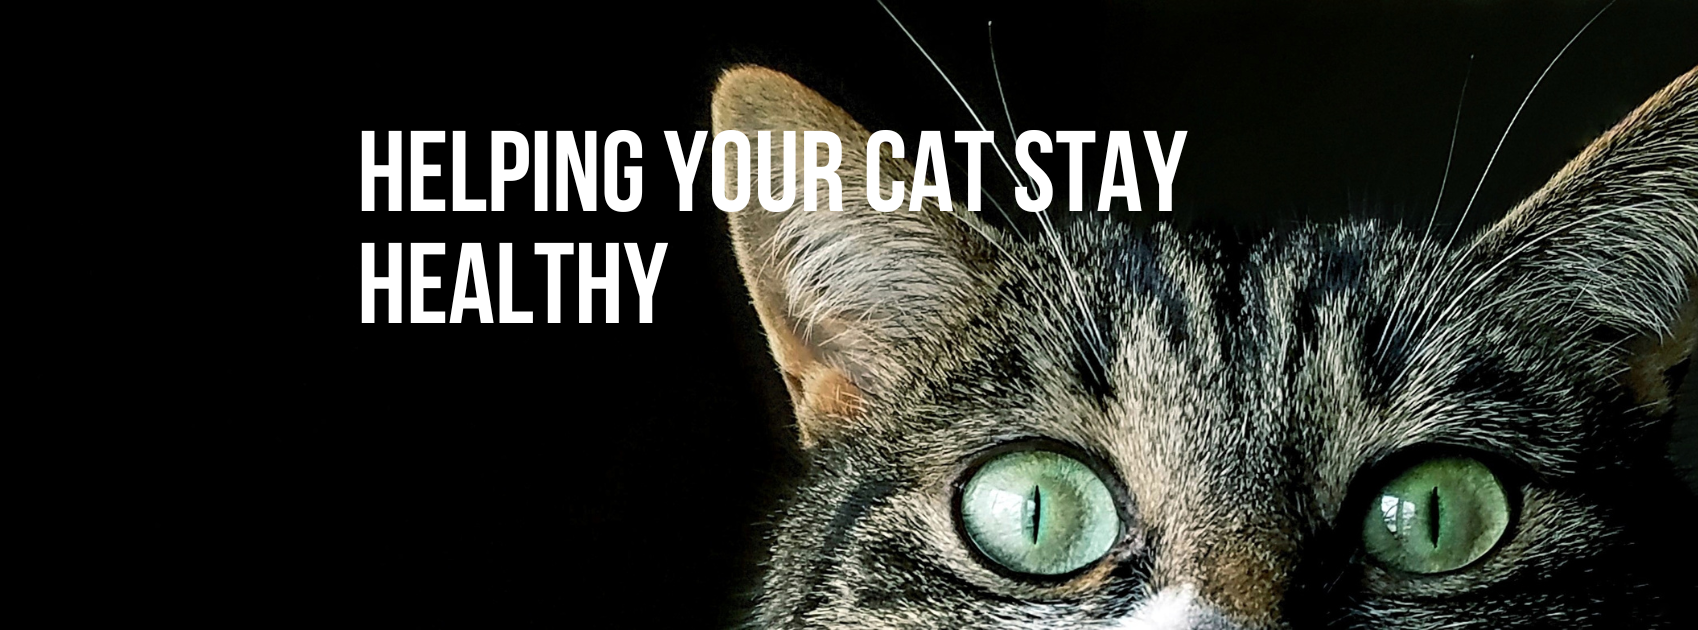 Helping Your Cat Stay Healthy